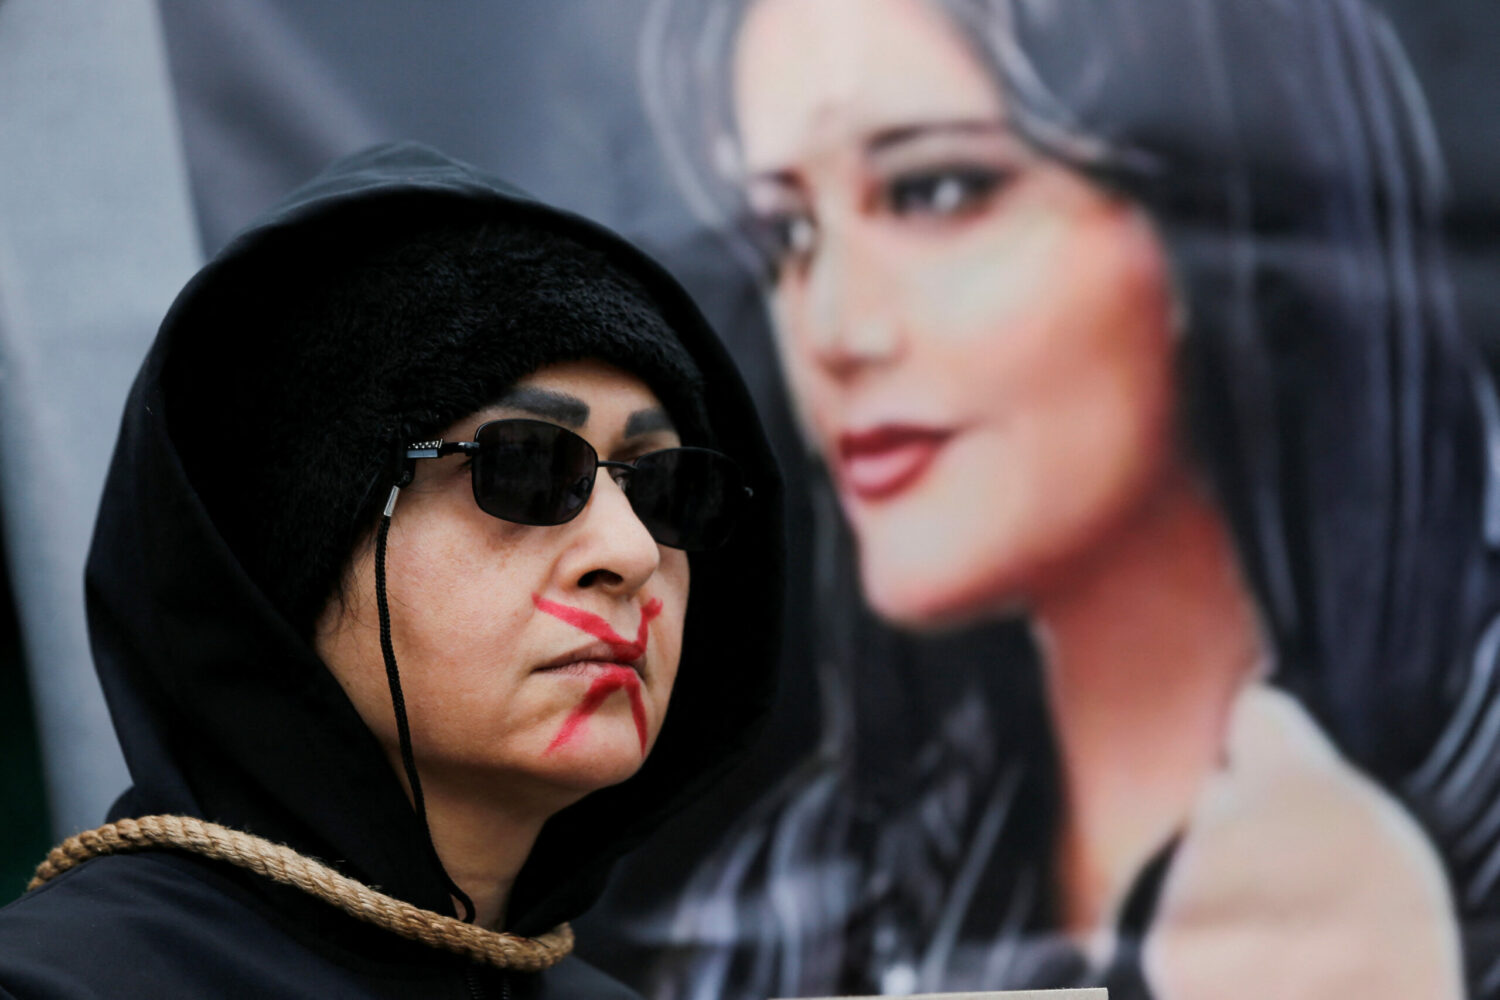 A poster of Mahsa Amini, who died in Iran after morality police took her into custody for wearing her hijab too loosely, is raised at a protest in Istanbul on December 10, 2022. (Dilara Senkaya/Reuters)